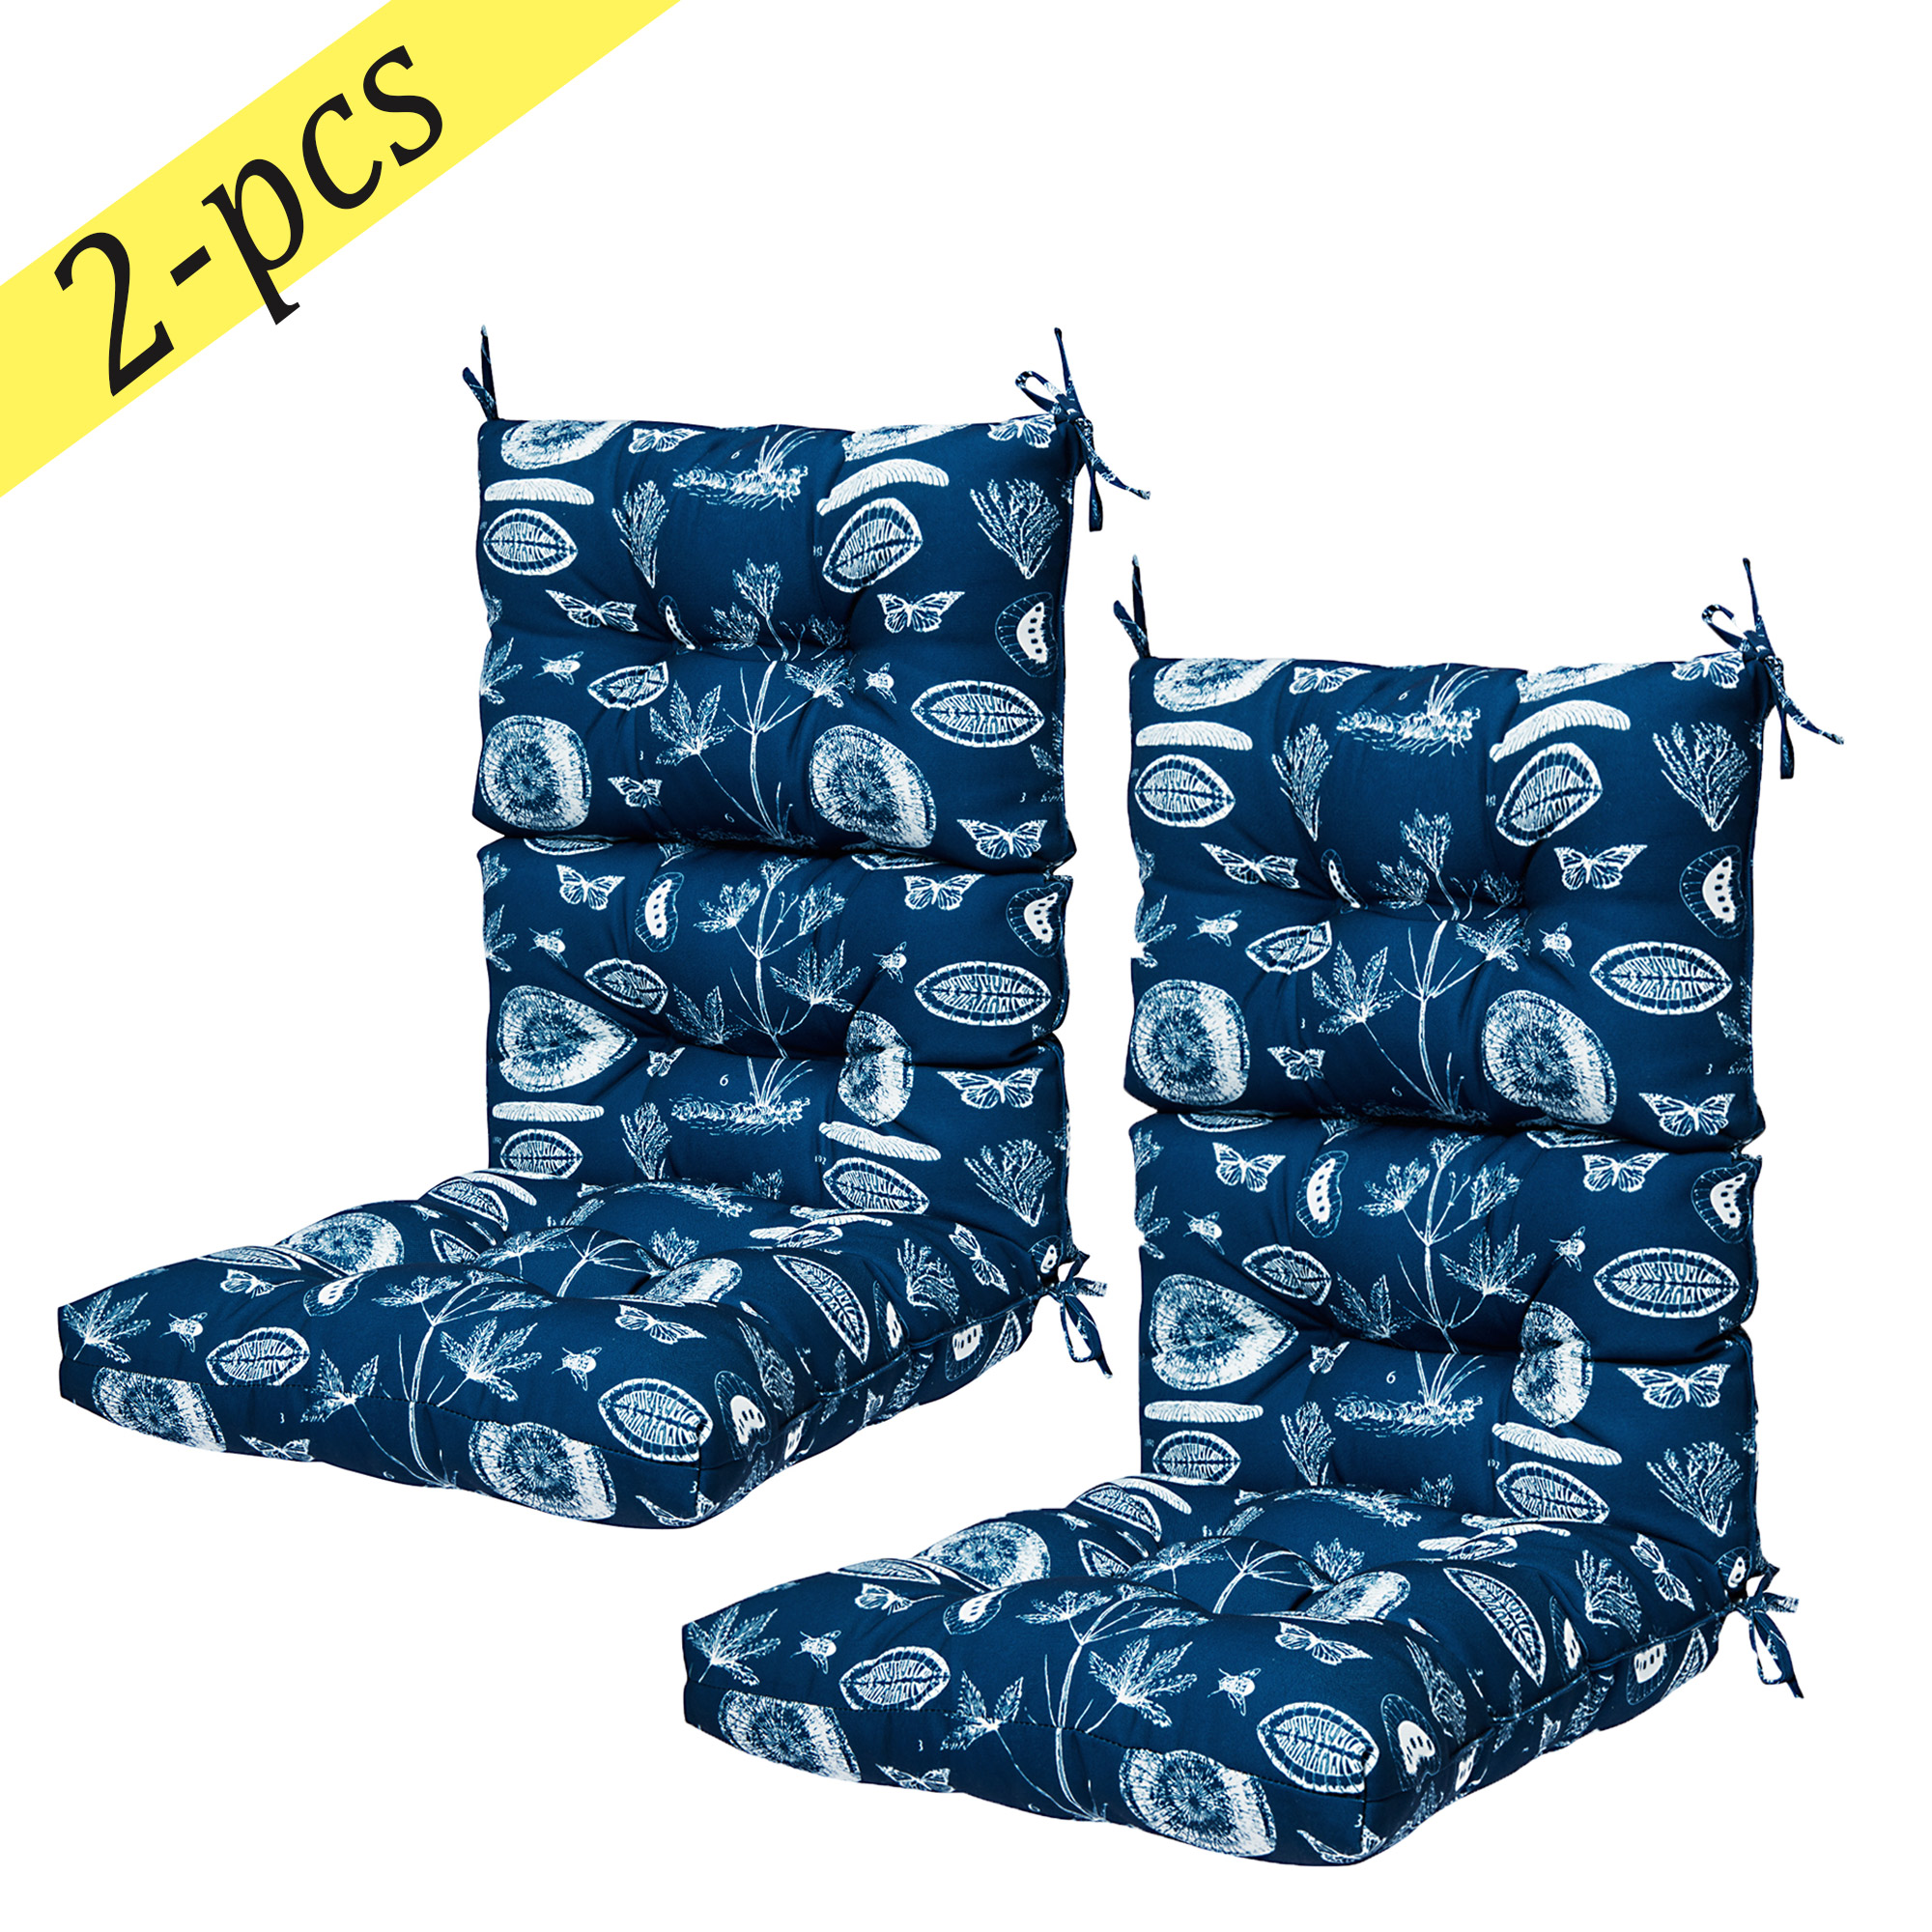 2 Pack/4 Pack Chaise Lounge Cushion Outdoor Chaise Lounge Cushion High Rebound Foam Polyester High Back Recliner Chair Cushion Patio Garden High Rebound Foam - image 1 of 8